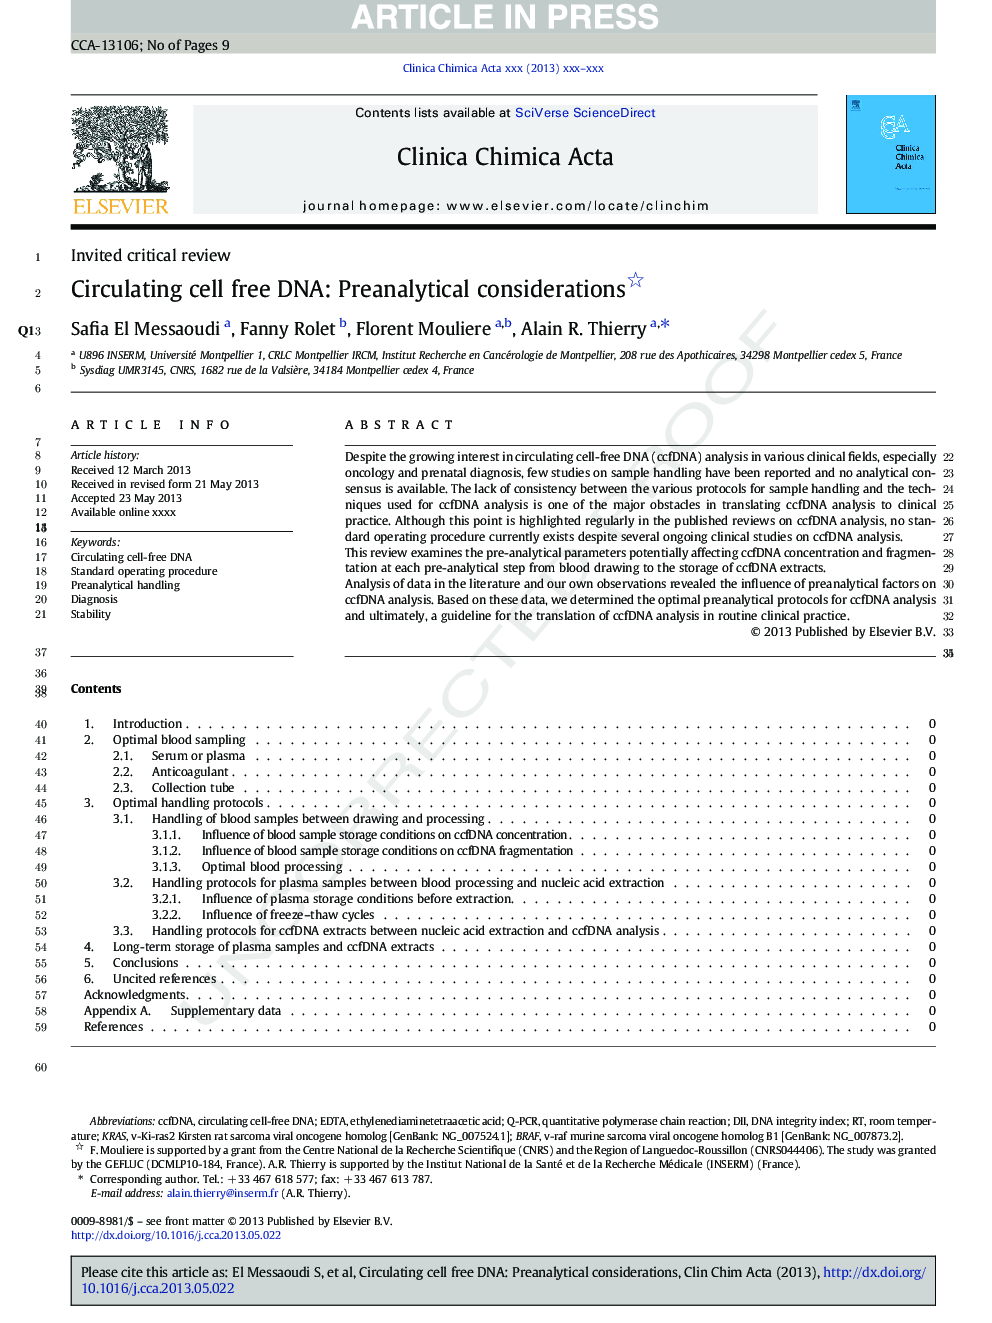 Circulating cell free DNA: Preanalytical considerations